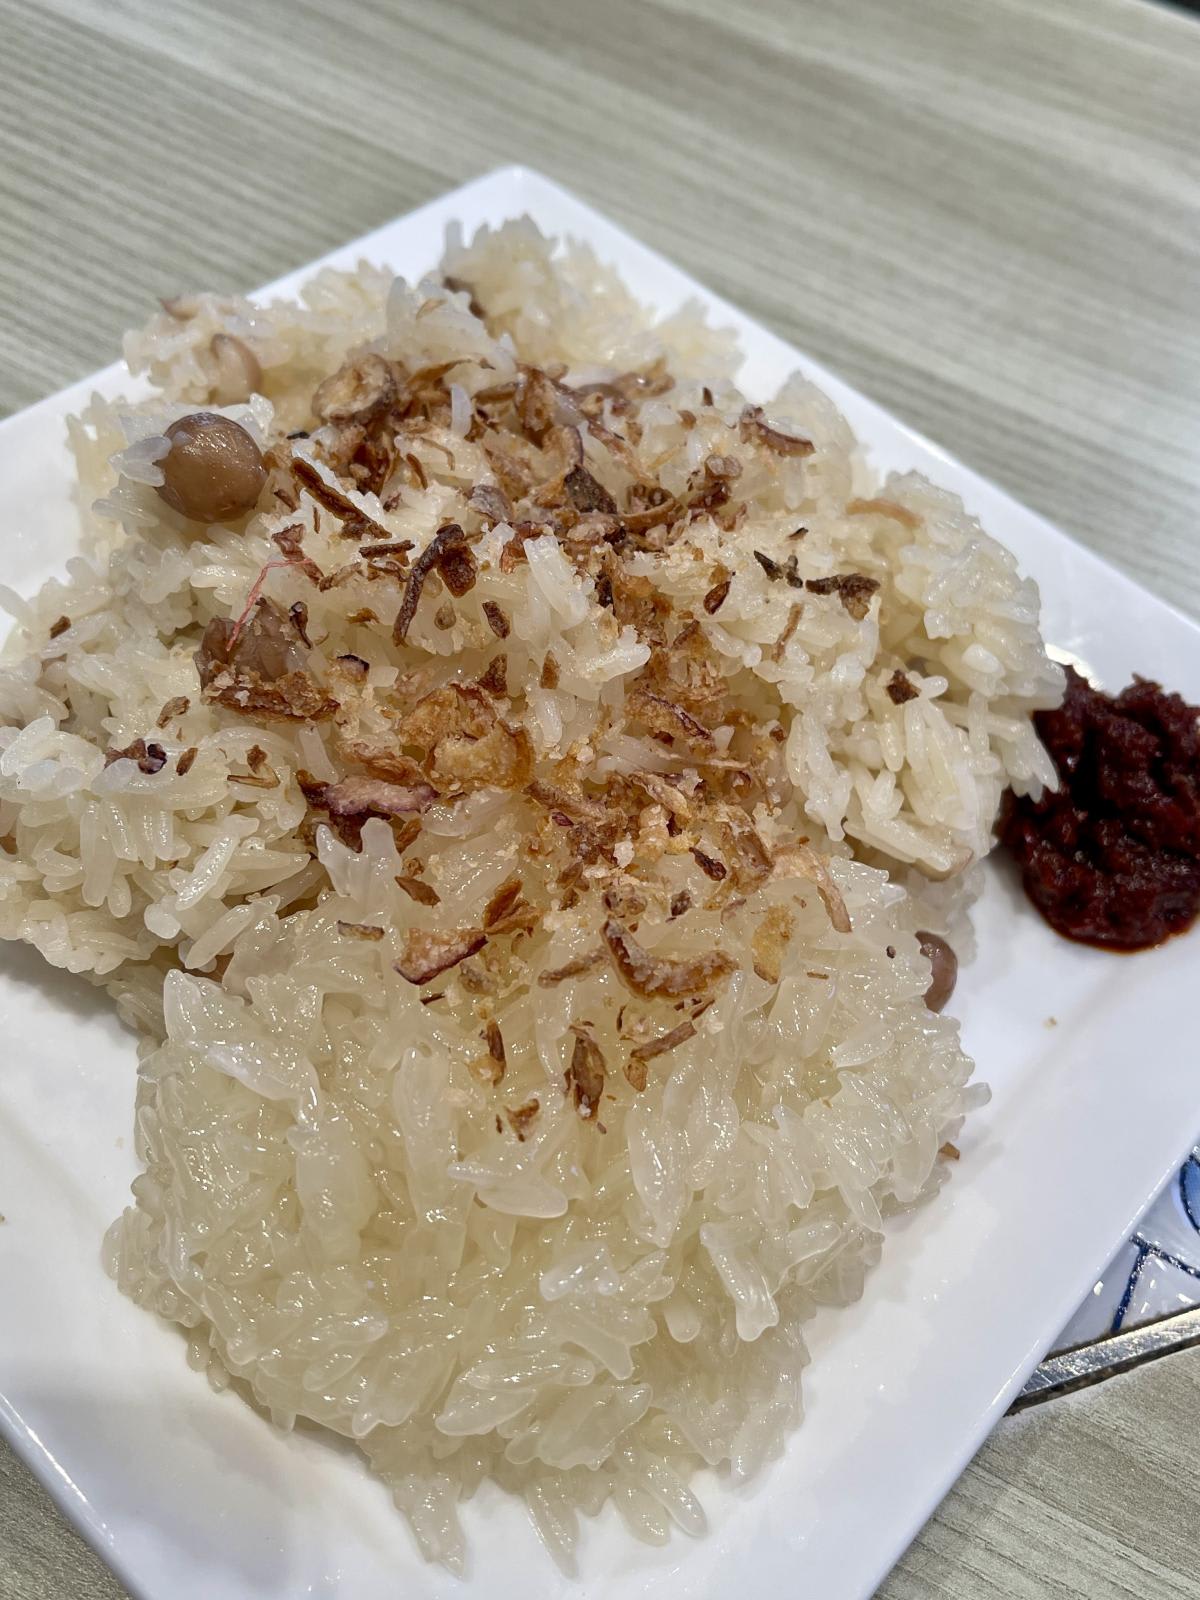 front_-_sweet_glutinous_rice_back_-_savoury_glutinous_rice_with_peanuts_and_fried_shallots_with_sambal.jpg